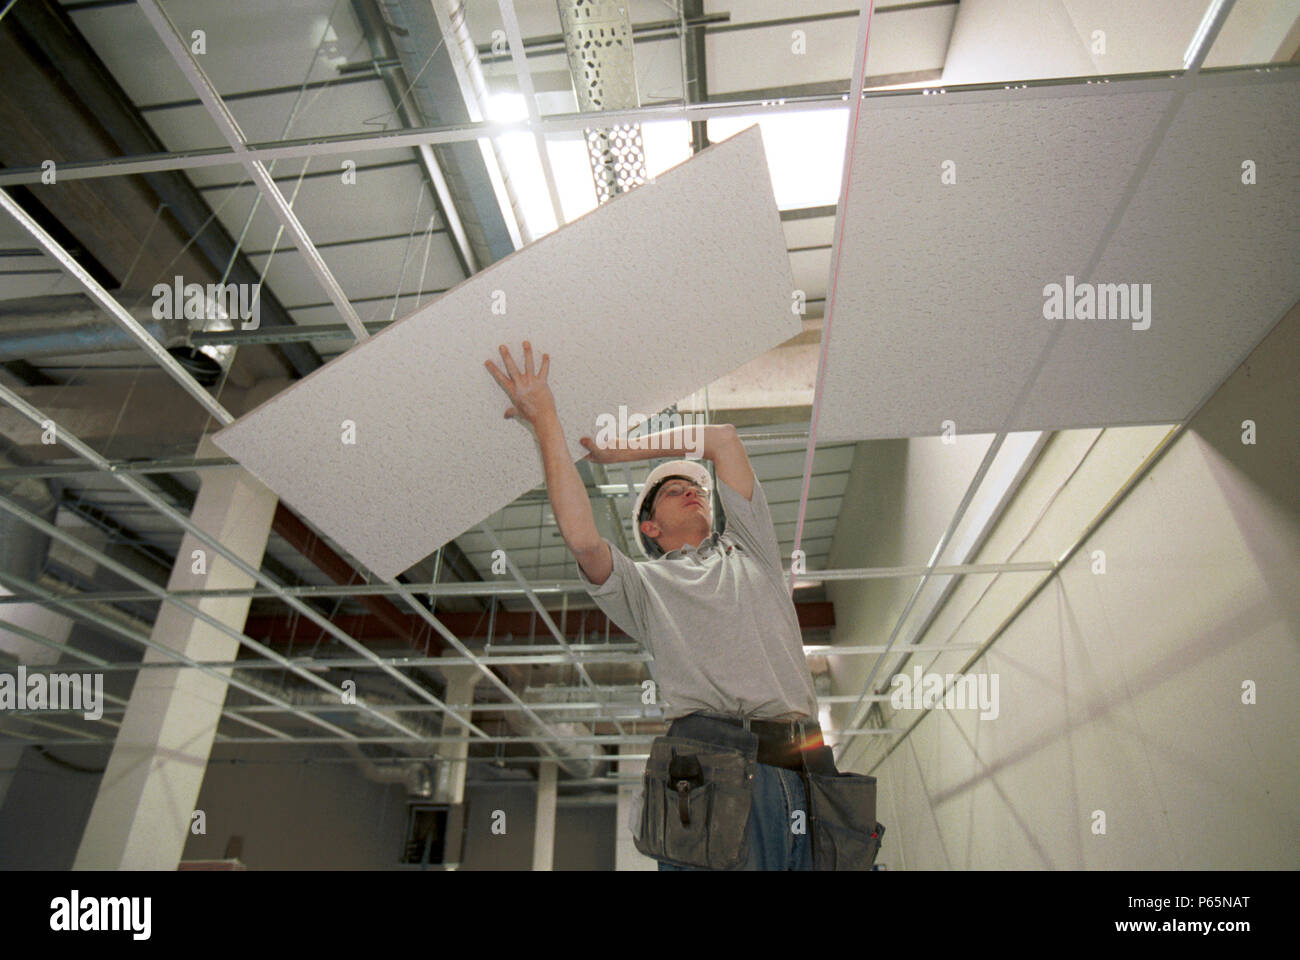 Fitting Tiles Into Suspended Ceiling Grid Stock Photo Alamy